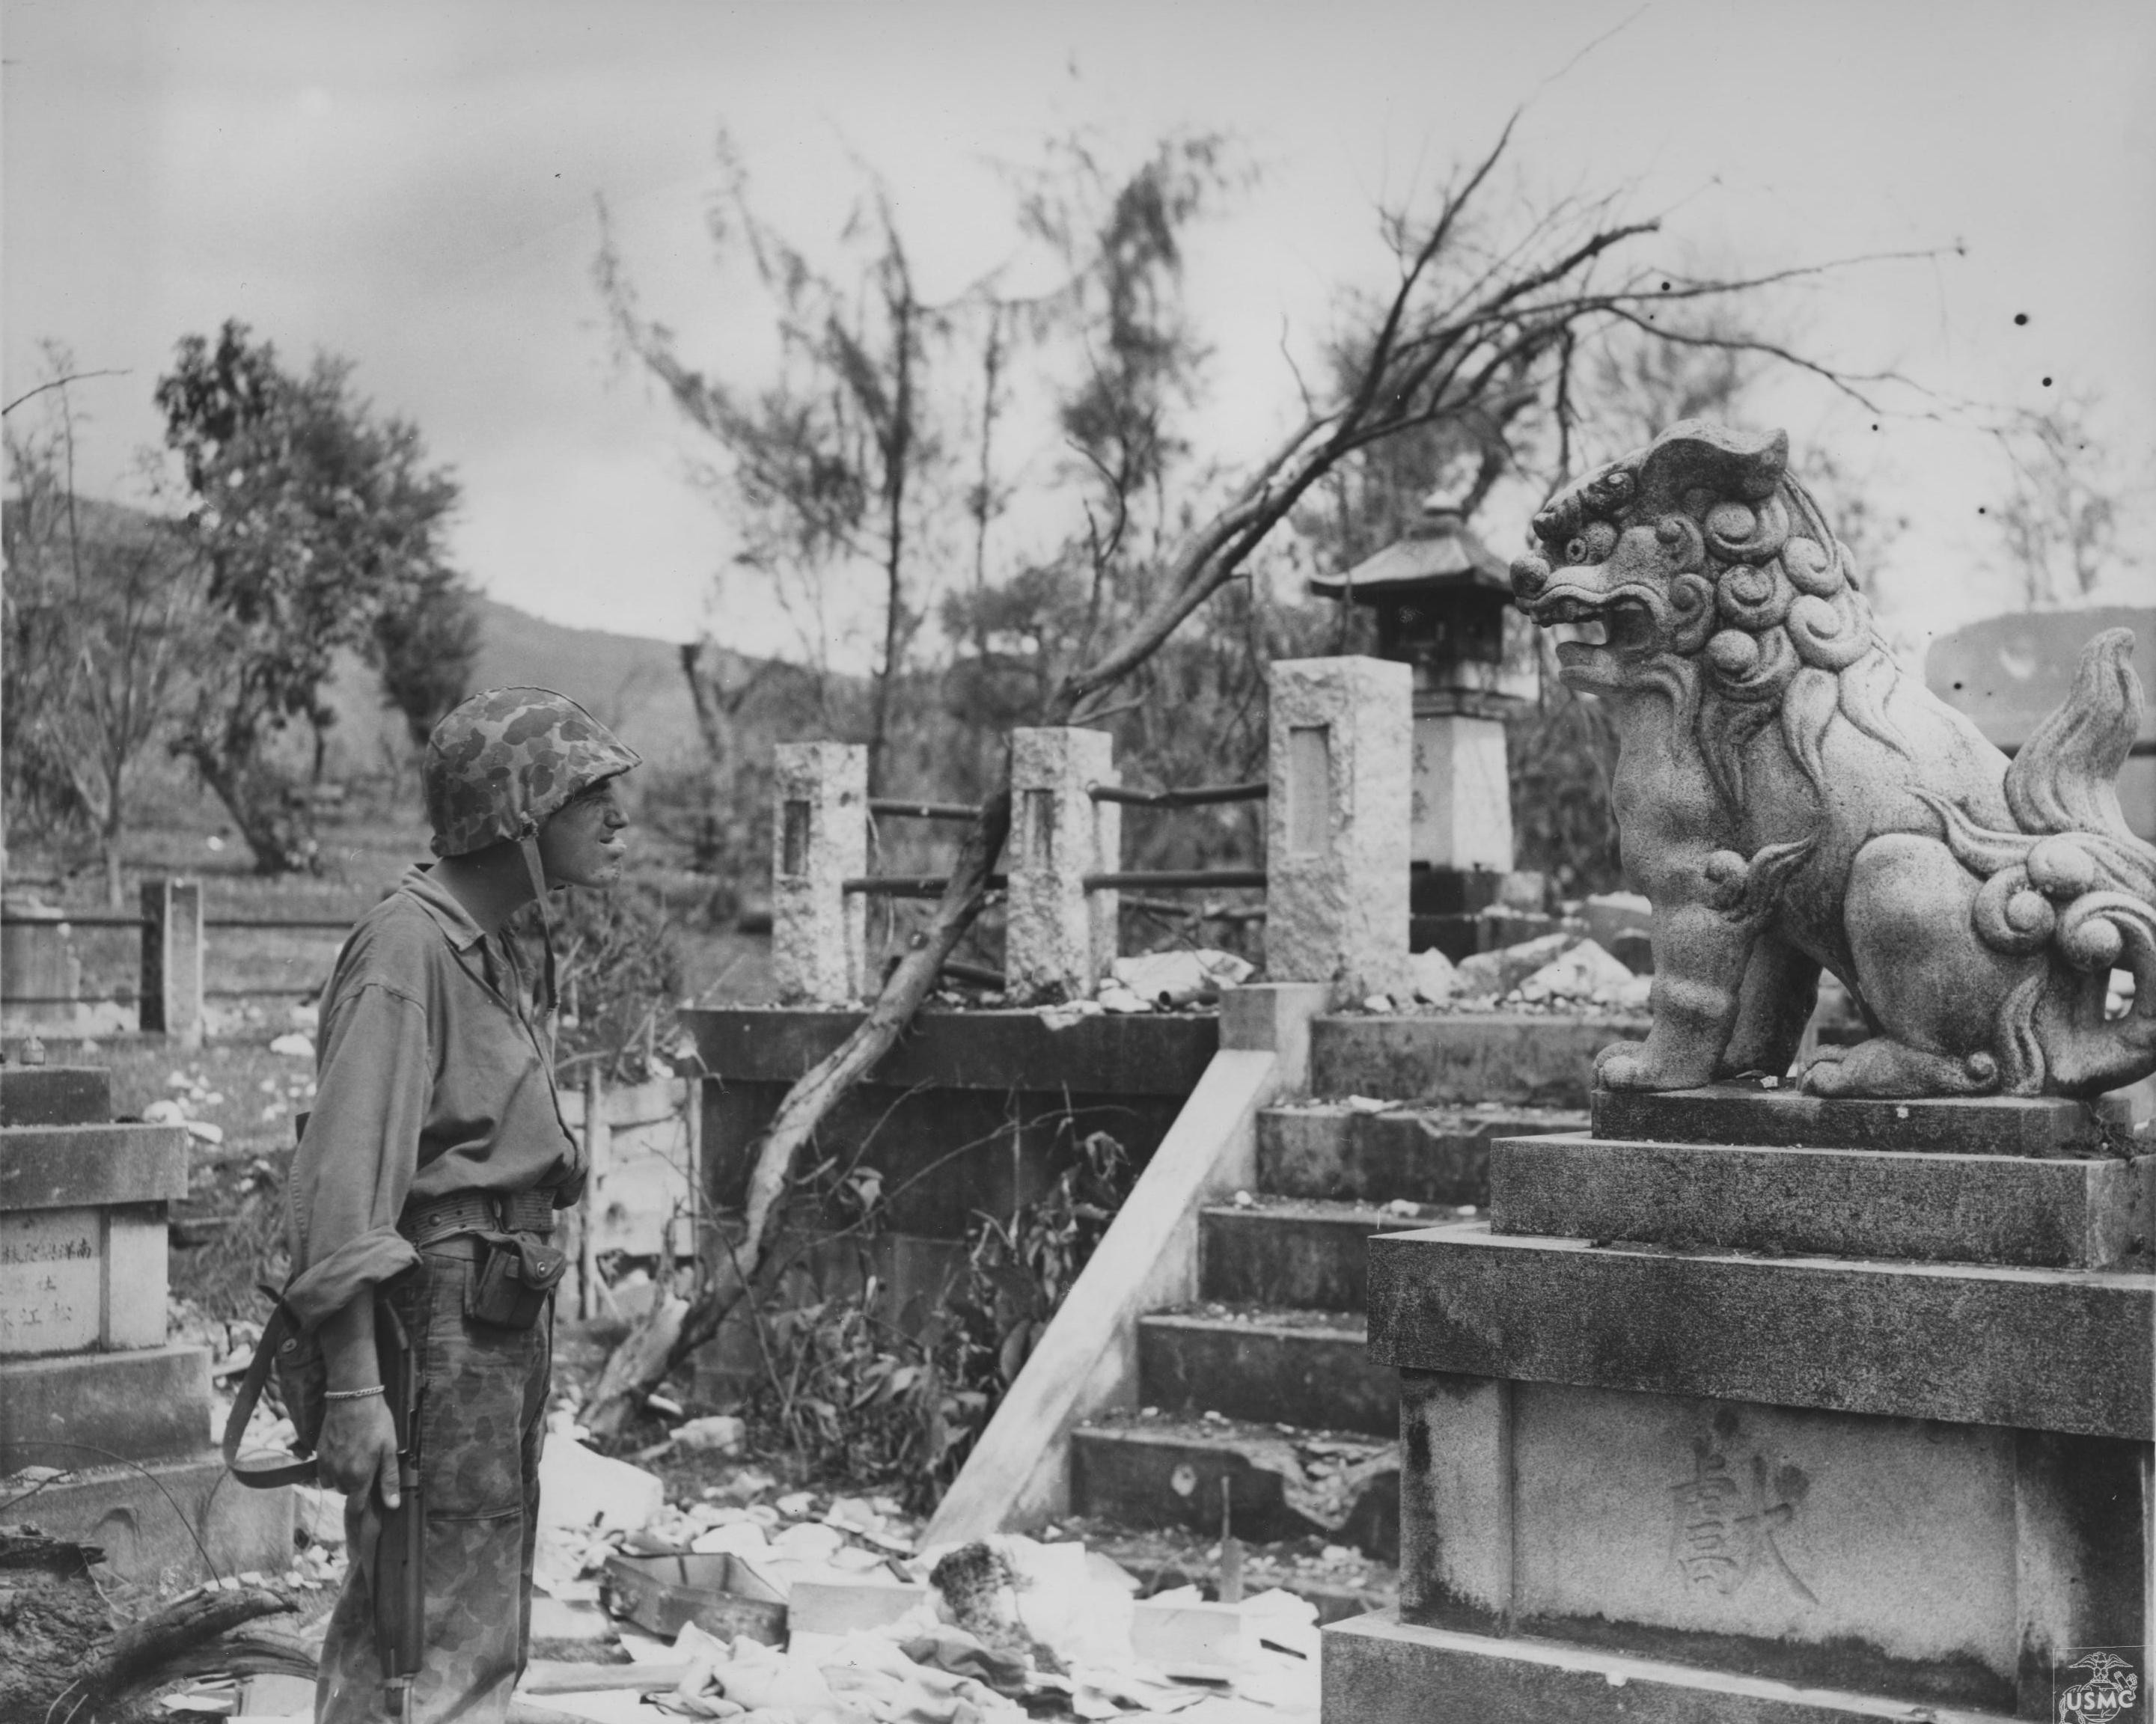 A US Marine having a moment of relaxation with a lion statue, Saipan, Mariana Islands, 27 Jul 1944